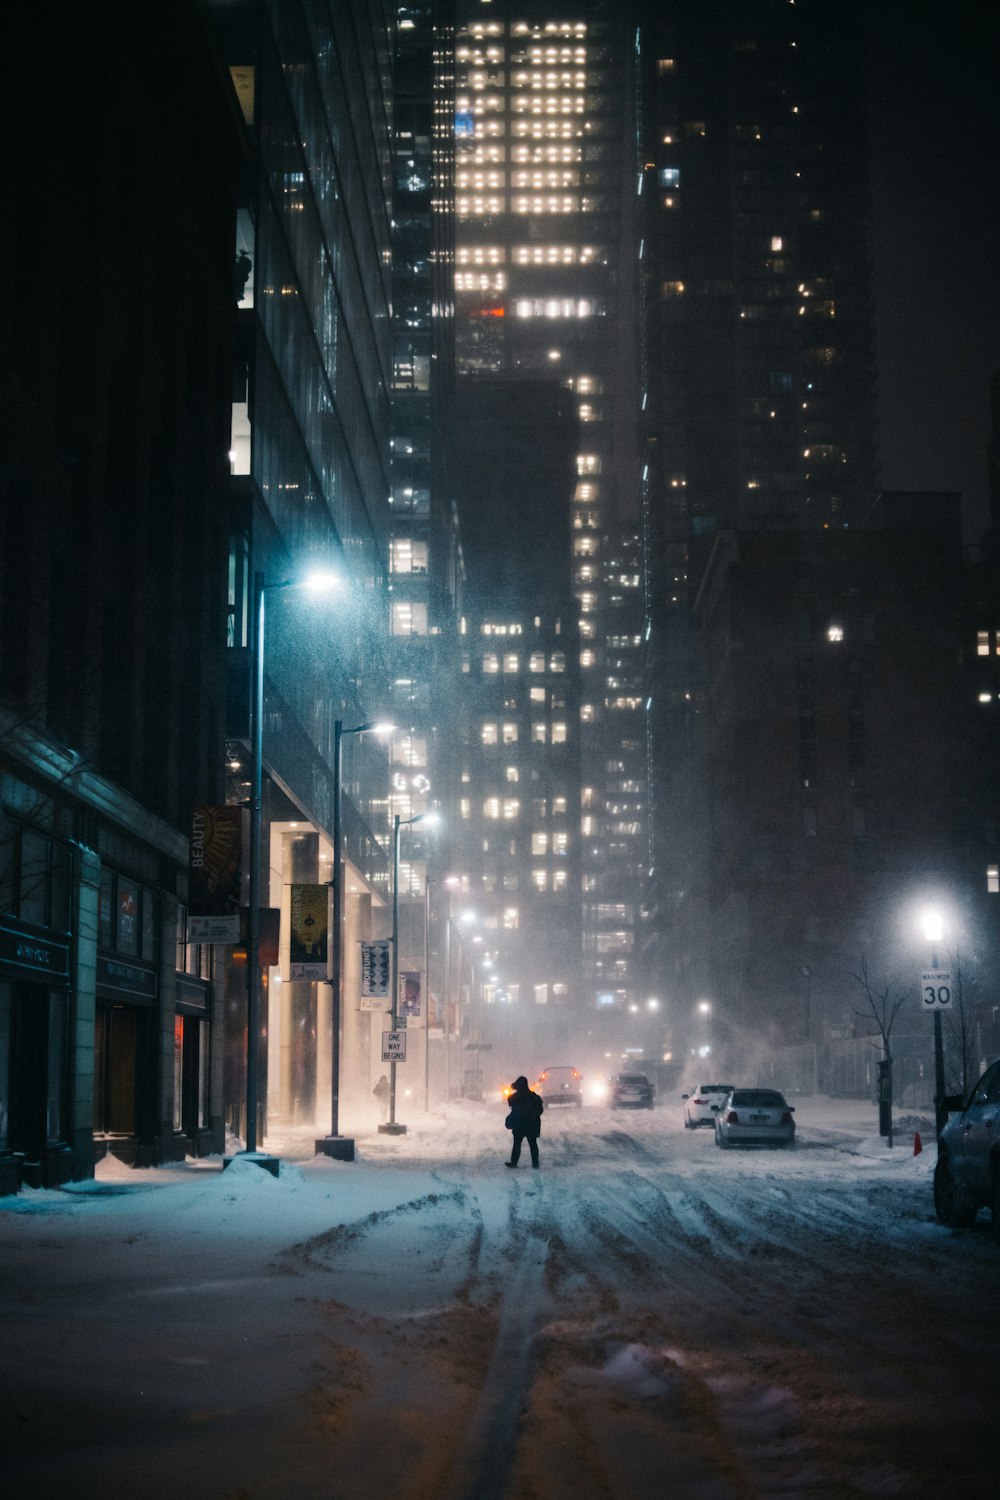 a person standing on a snowy street at night